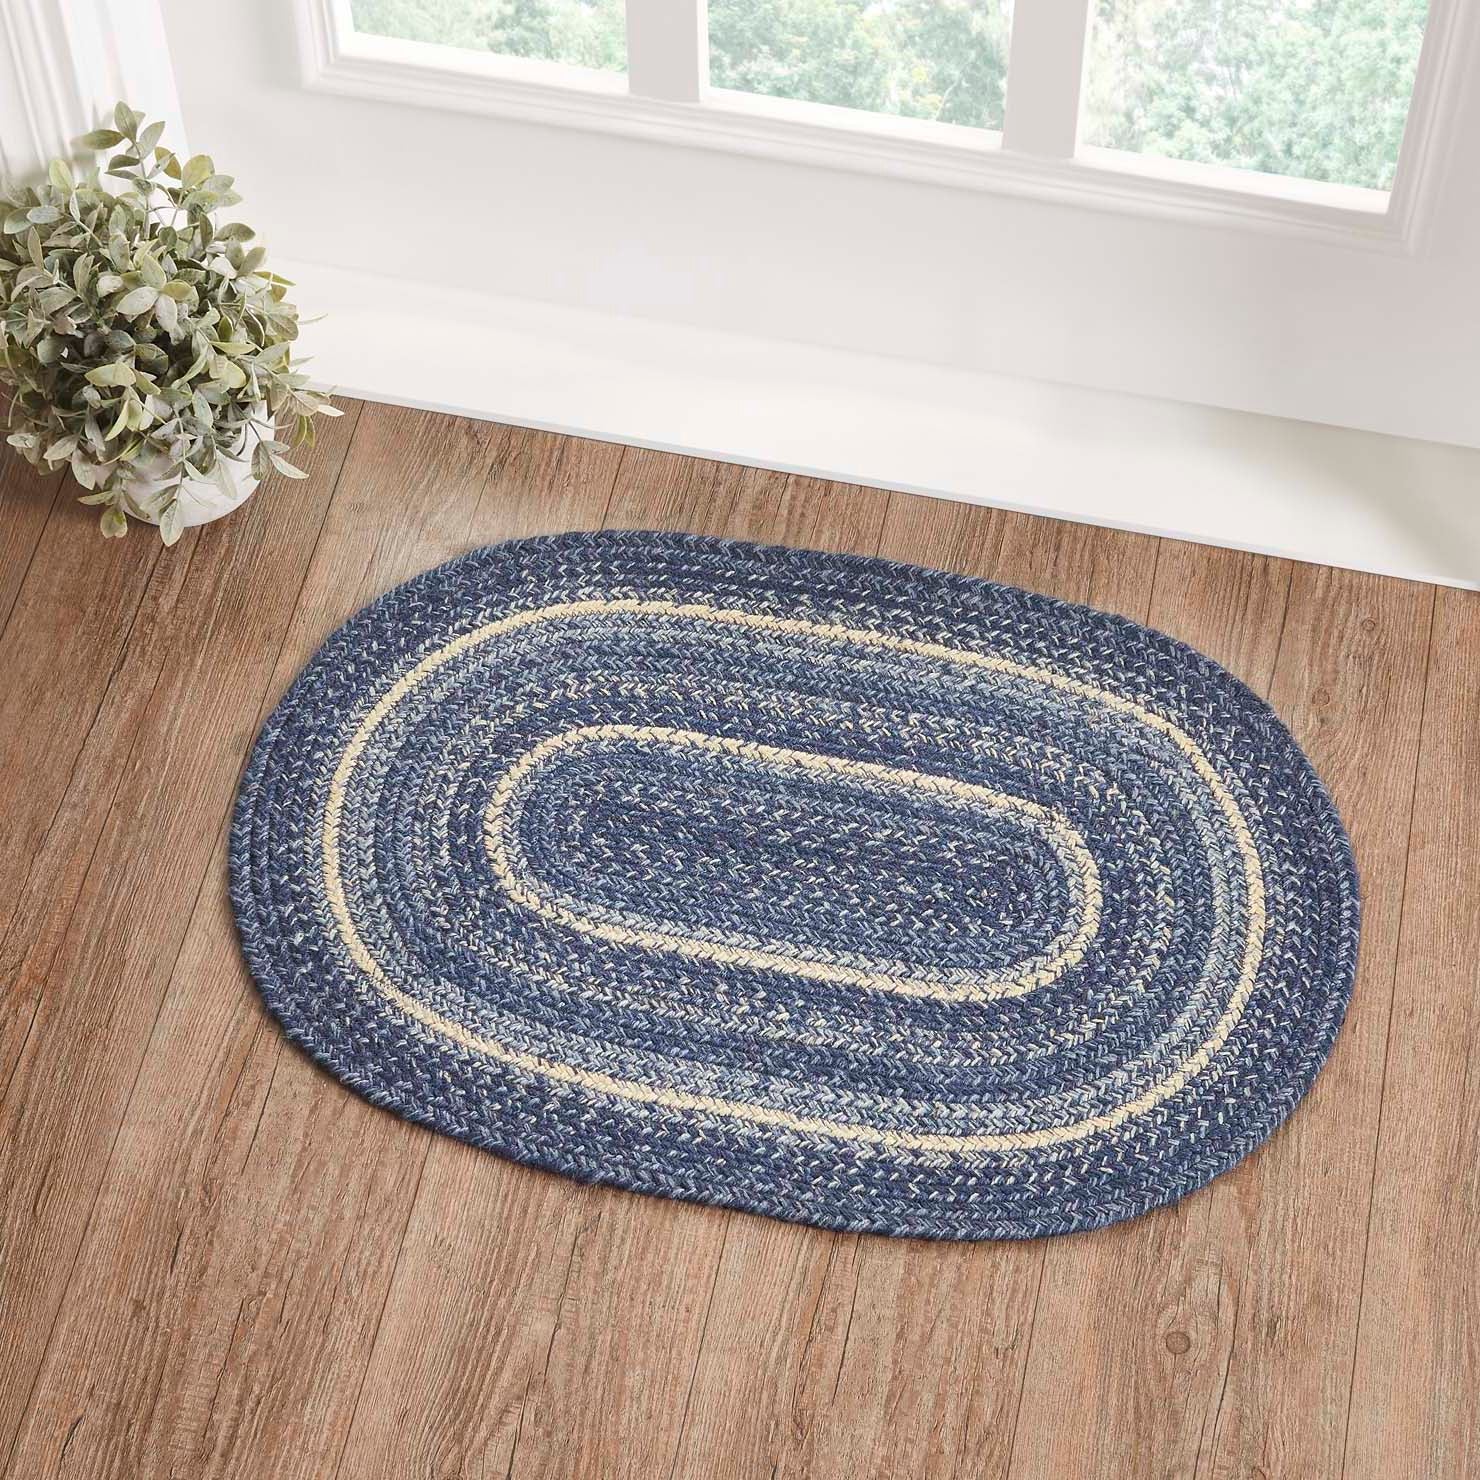 Great Falls Blue Jute Braided Rug Oval with Rug Pad 20"x30" VHC Brands